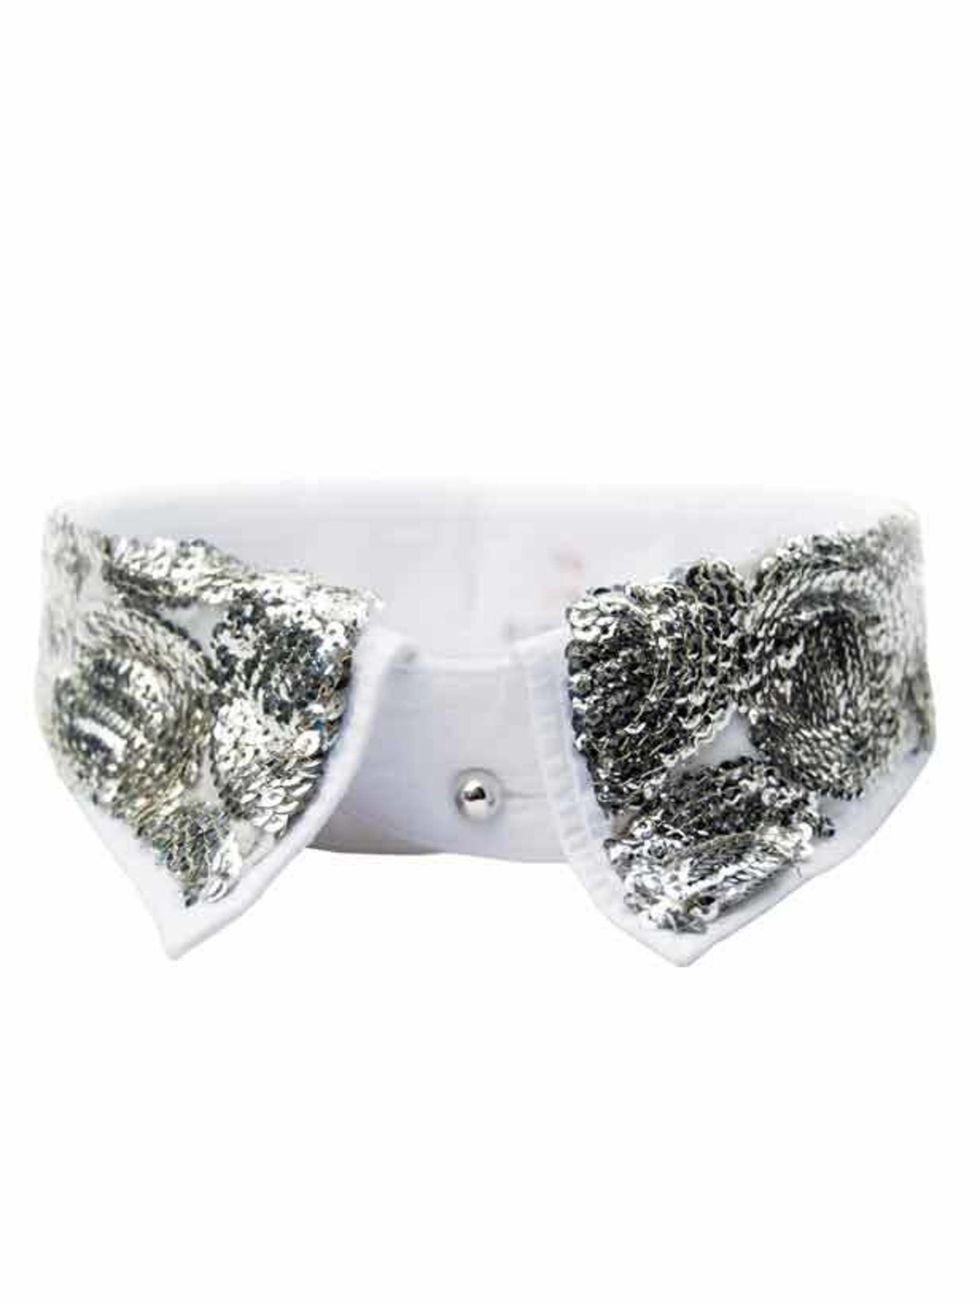 <p>Cabinet Lustre collar, £240, at My Sugarland, call 020 7841 7131</p>